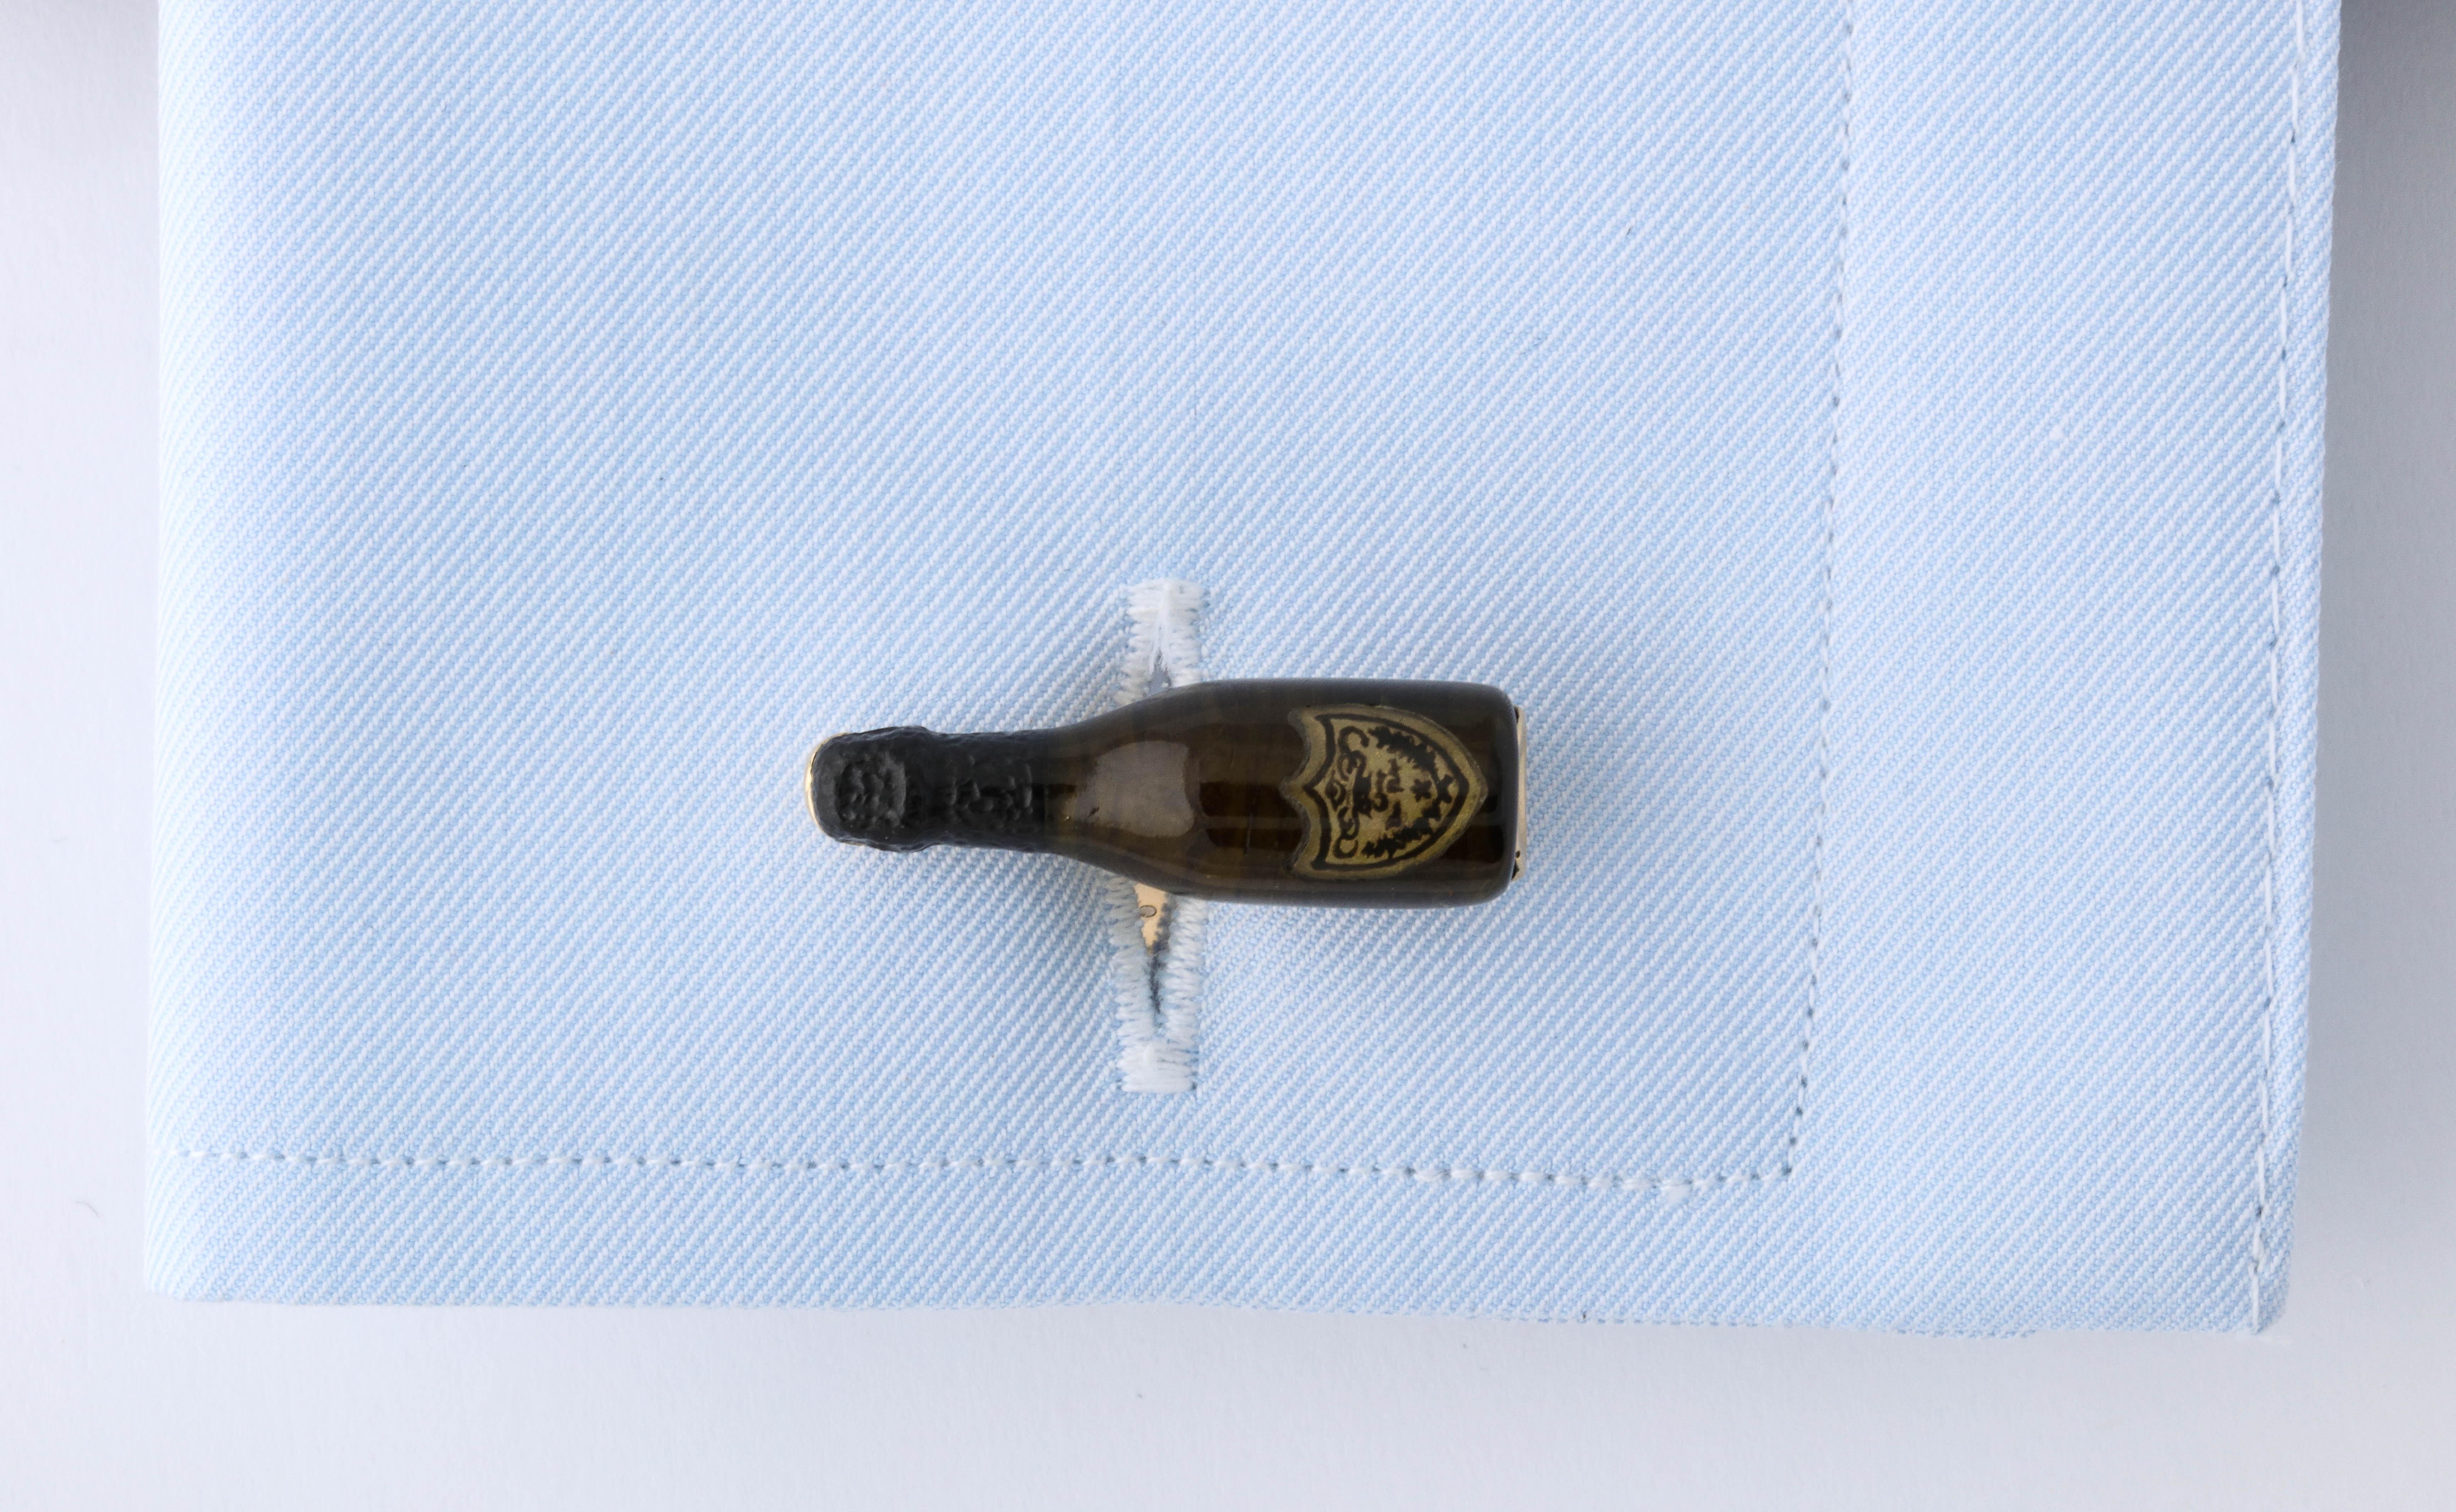 These are truly the most unique champagne bottle cufflinks around. The body of the bottle is expertly shaped from green tourmaline by a master stone carver. The top of the bottle, which is traditionally covered in black foil, is carved from black